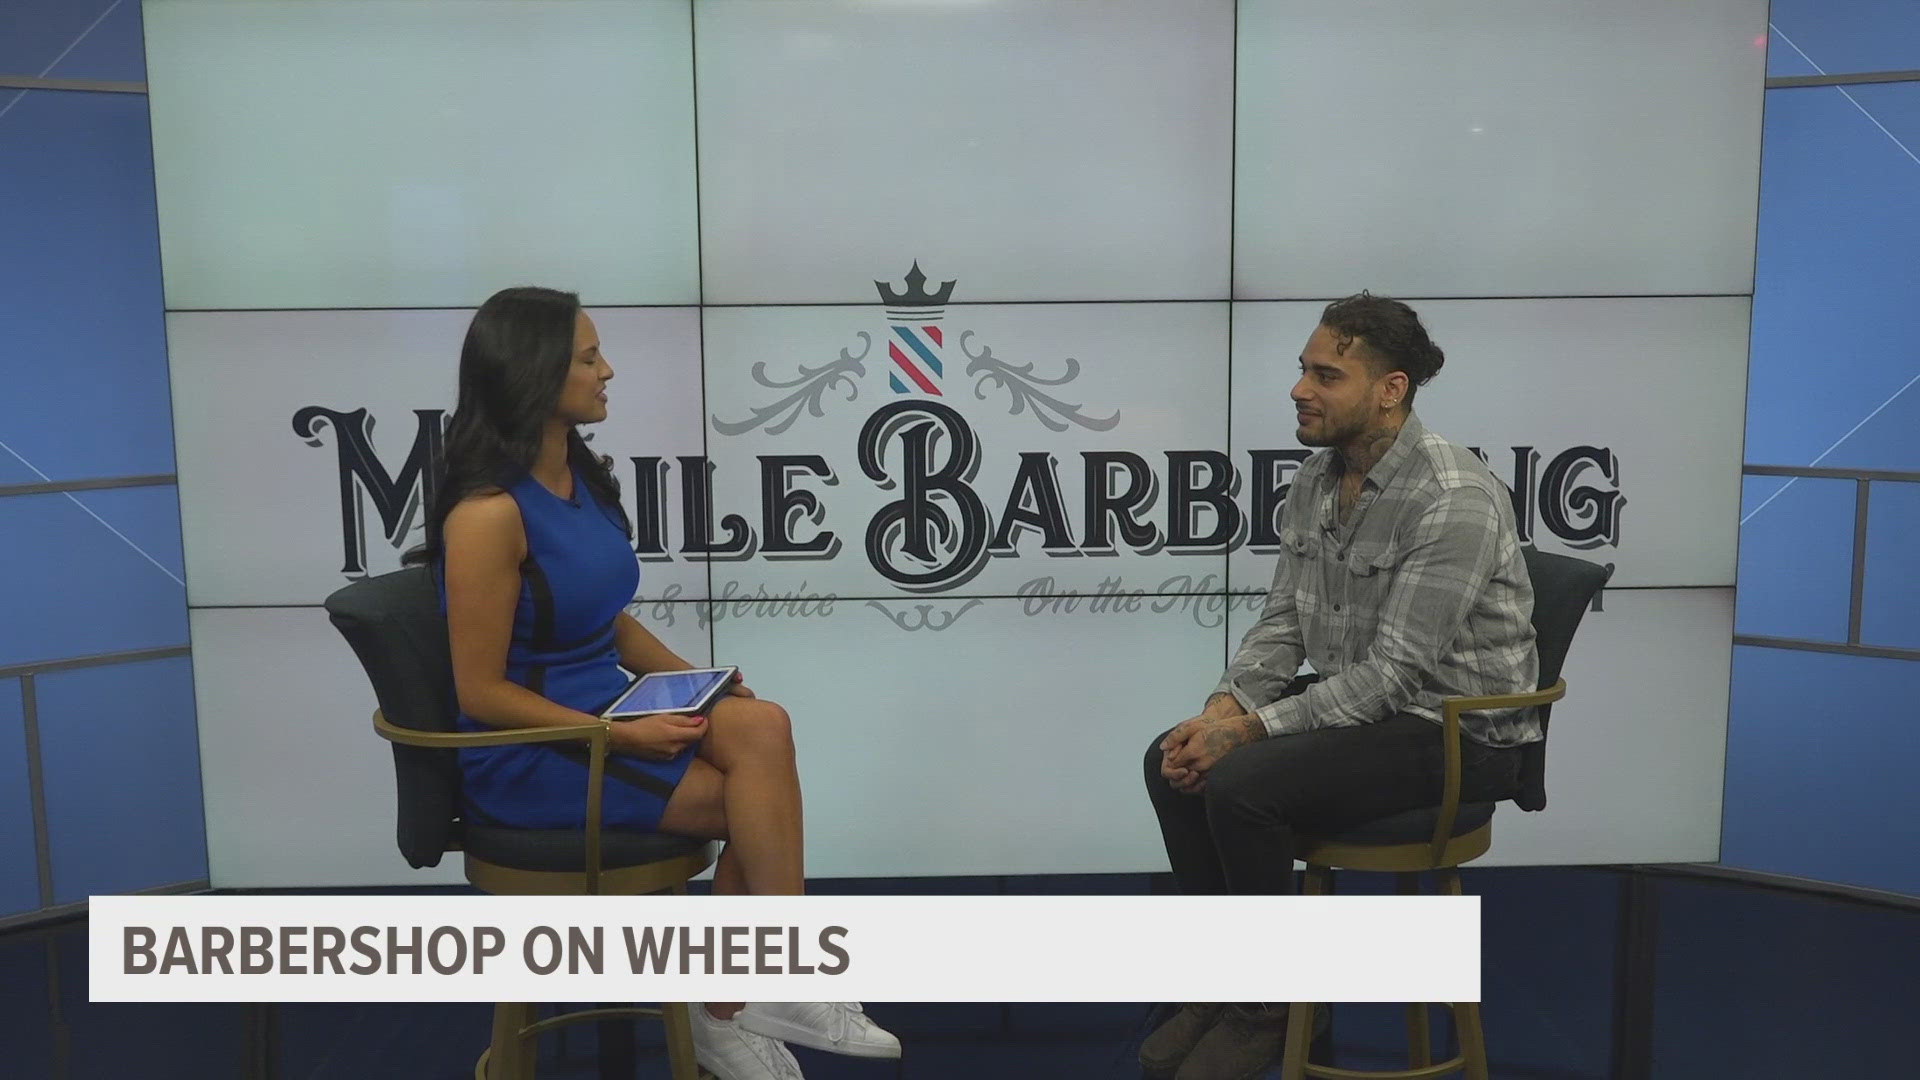 Jake Sahr is the owner and stylist at The Mobile Barbering Co.